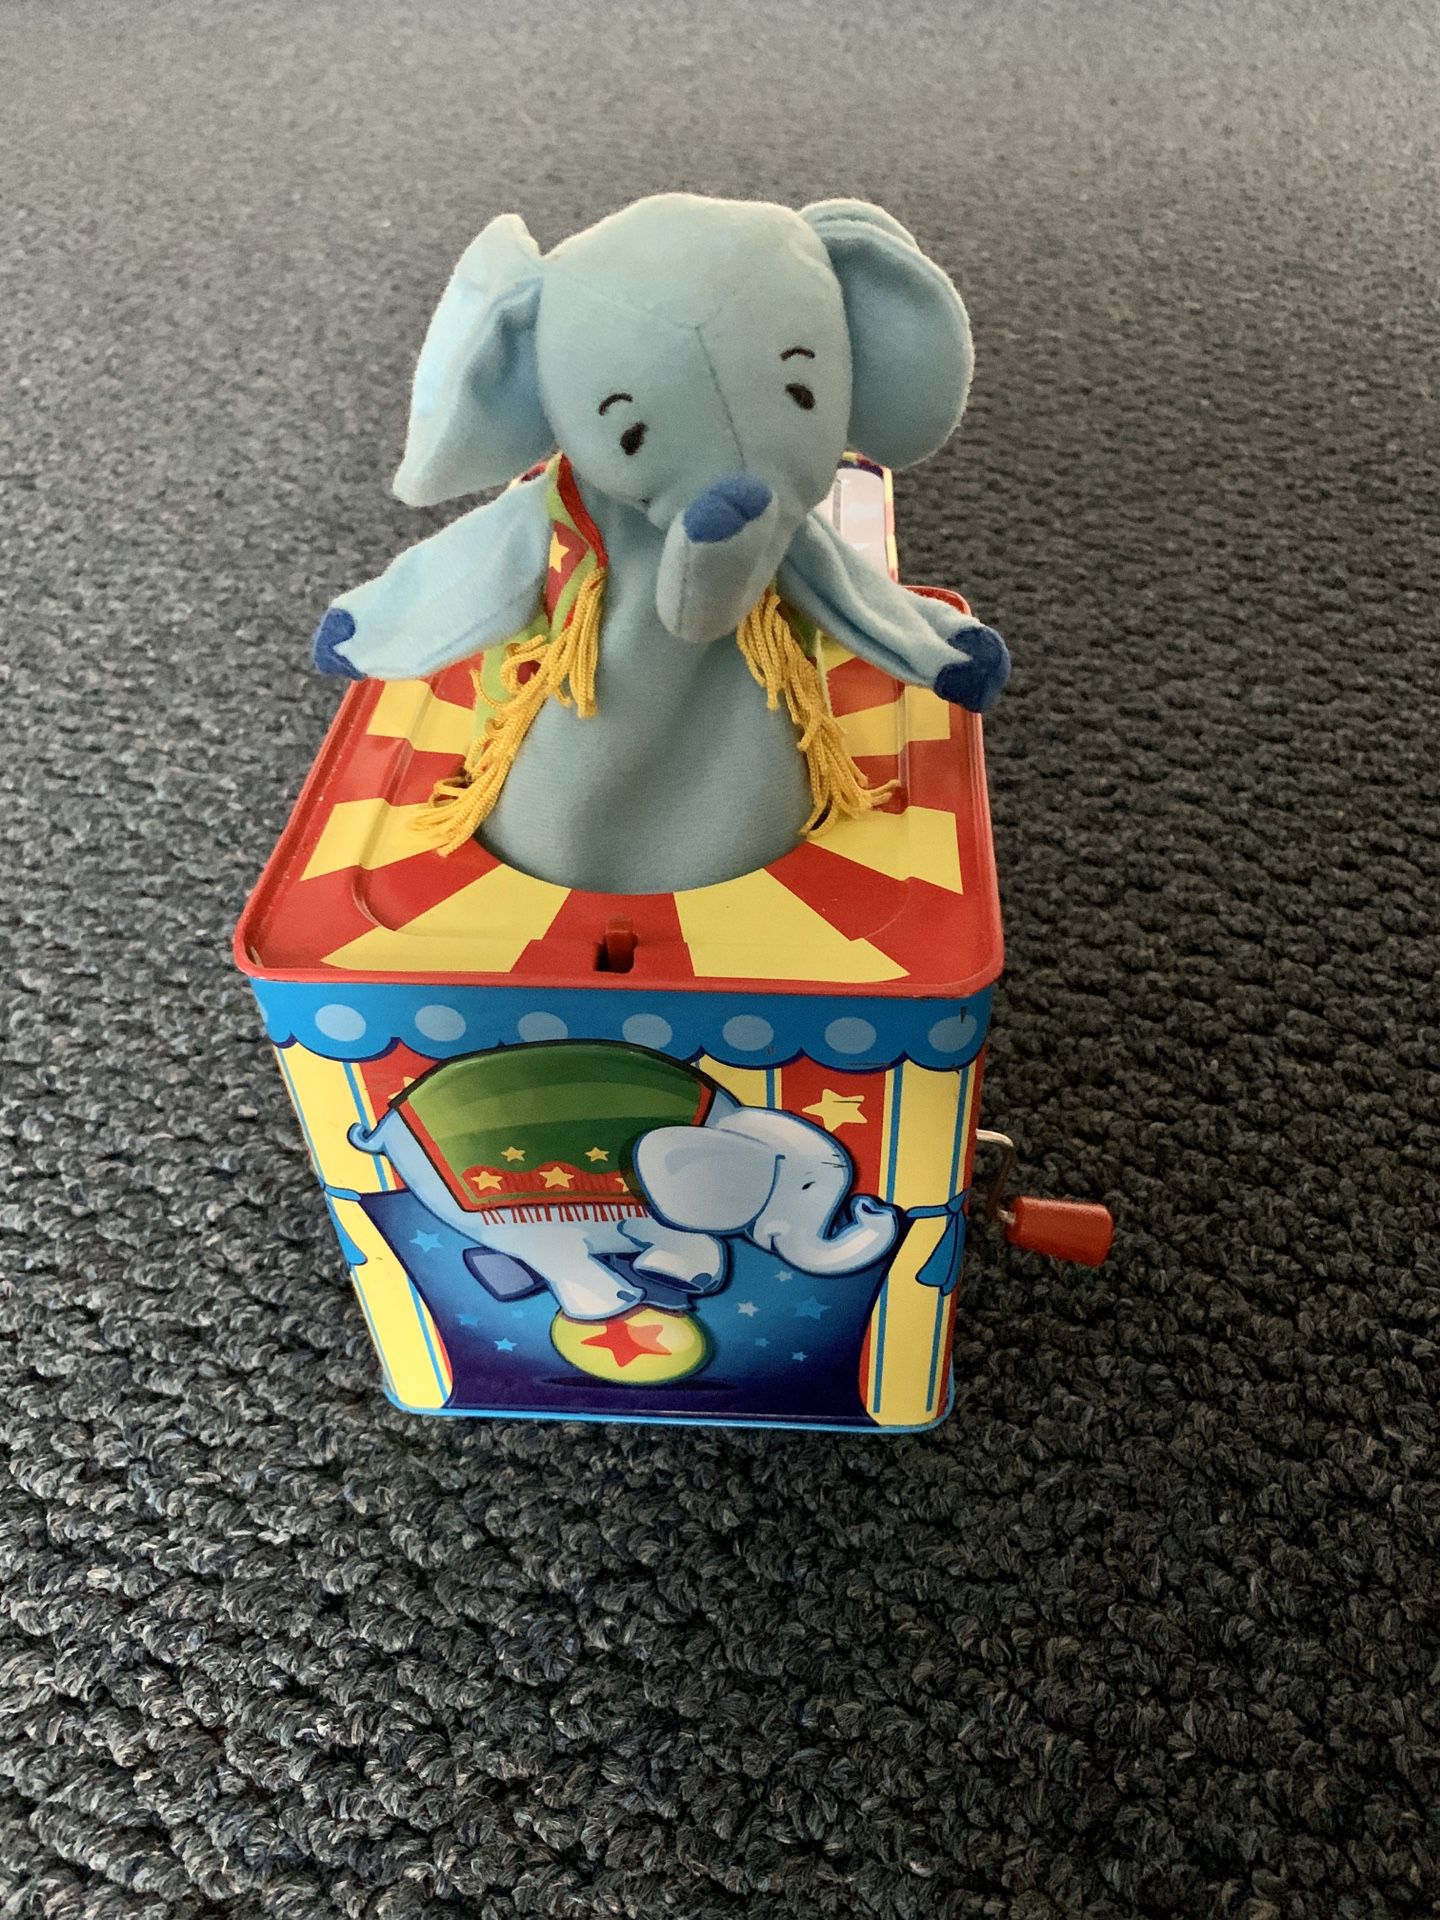 Schylling's silly circus elephant jack in the box